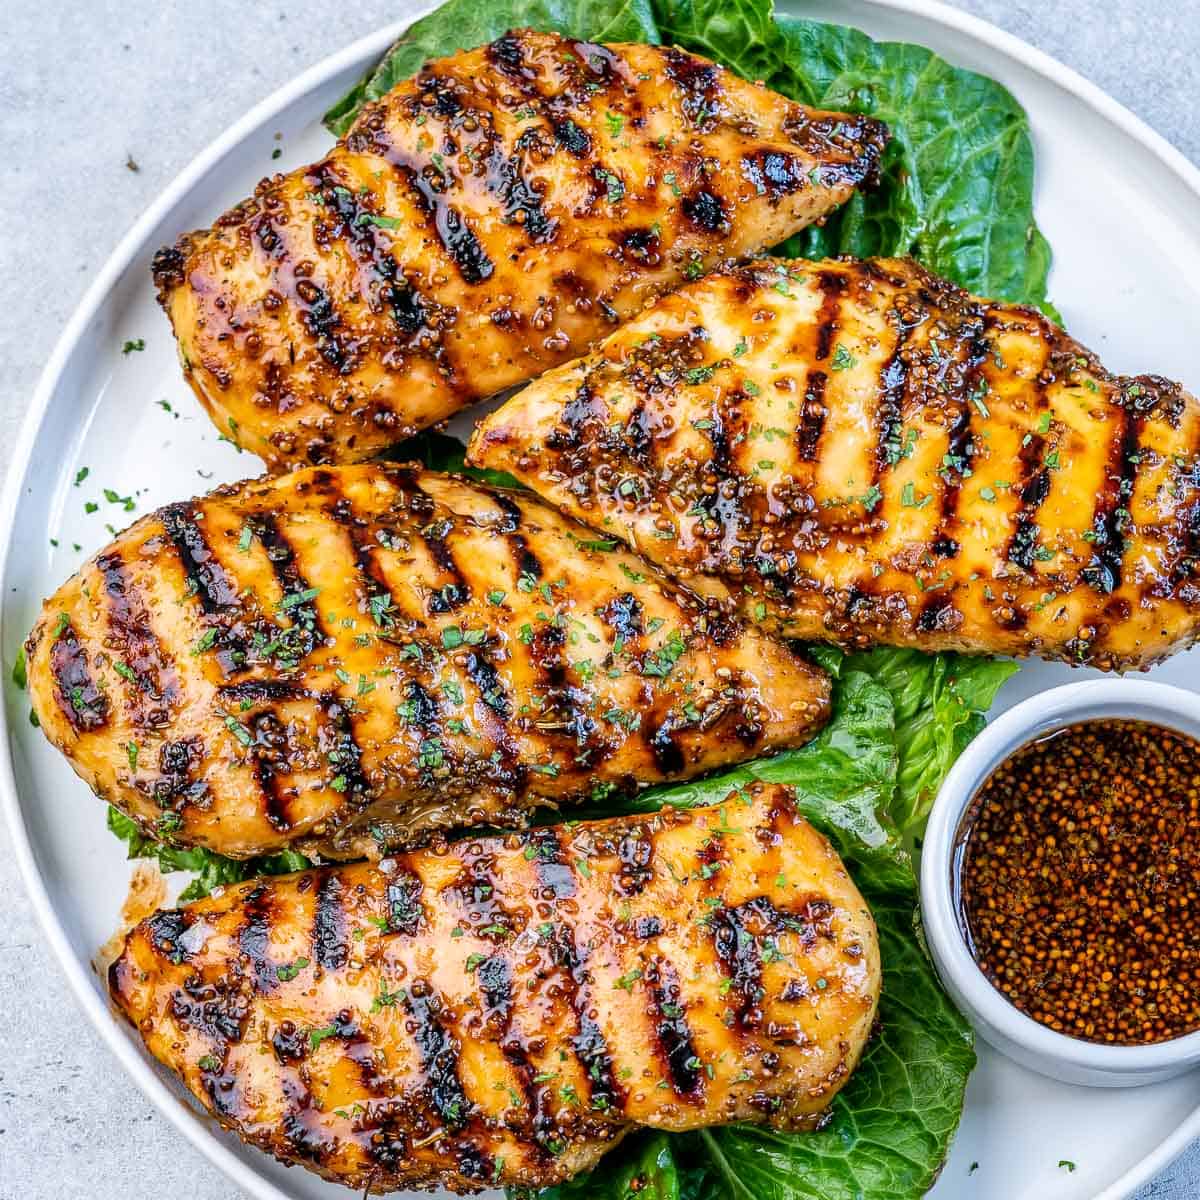 Top view of 4 grilled chicken breasts on a plate over a lettuce leaf.